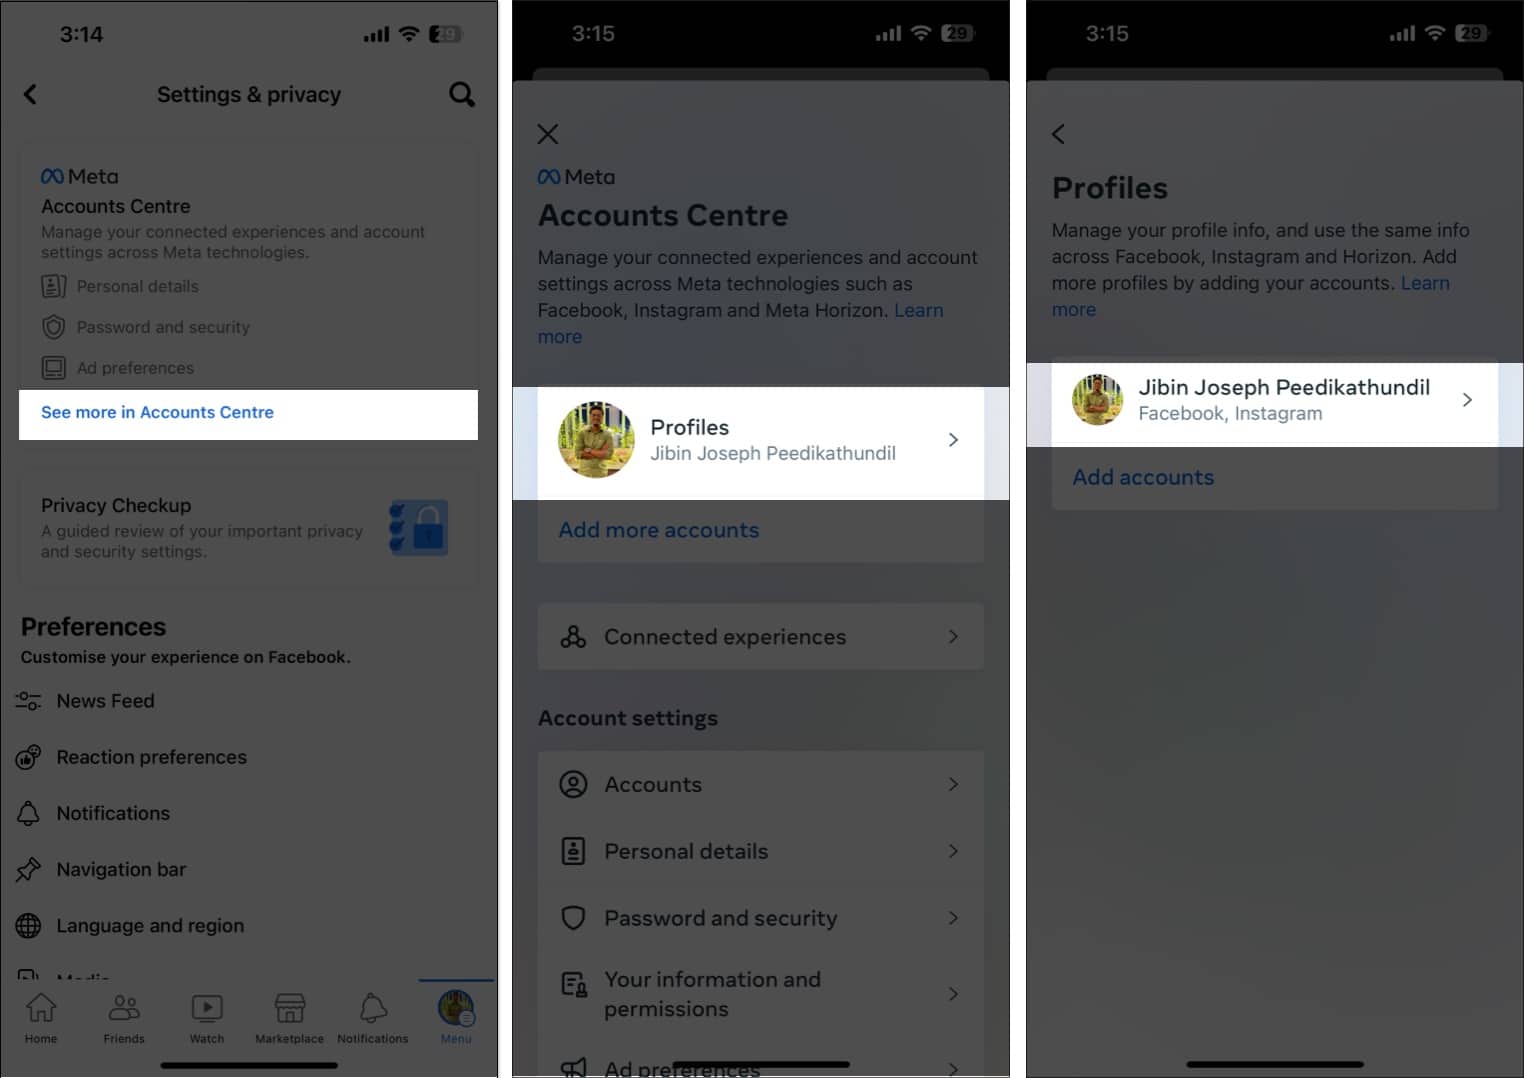 Access accounts centre, tap your profile, select the profile in the facebook app